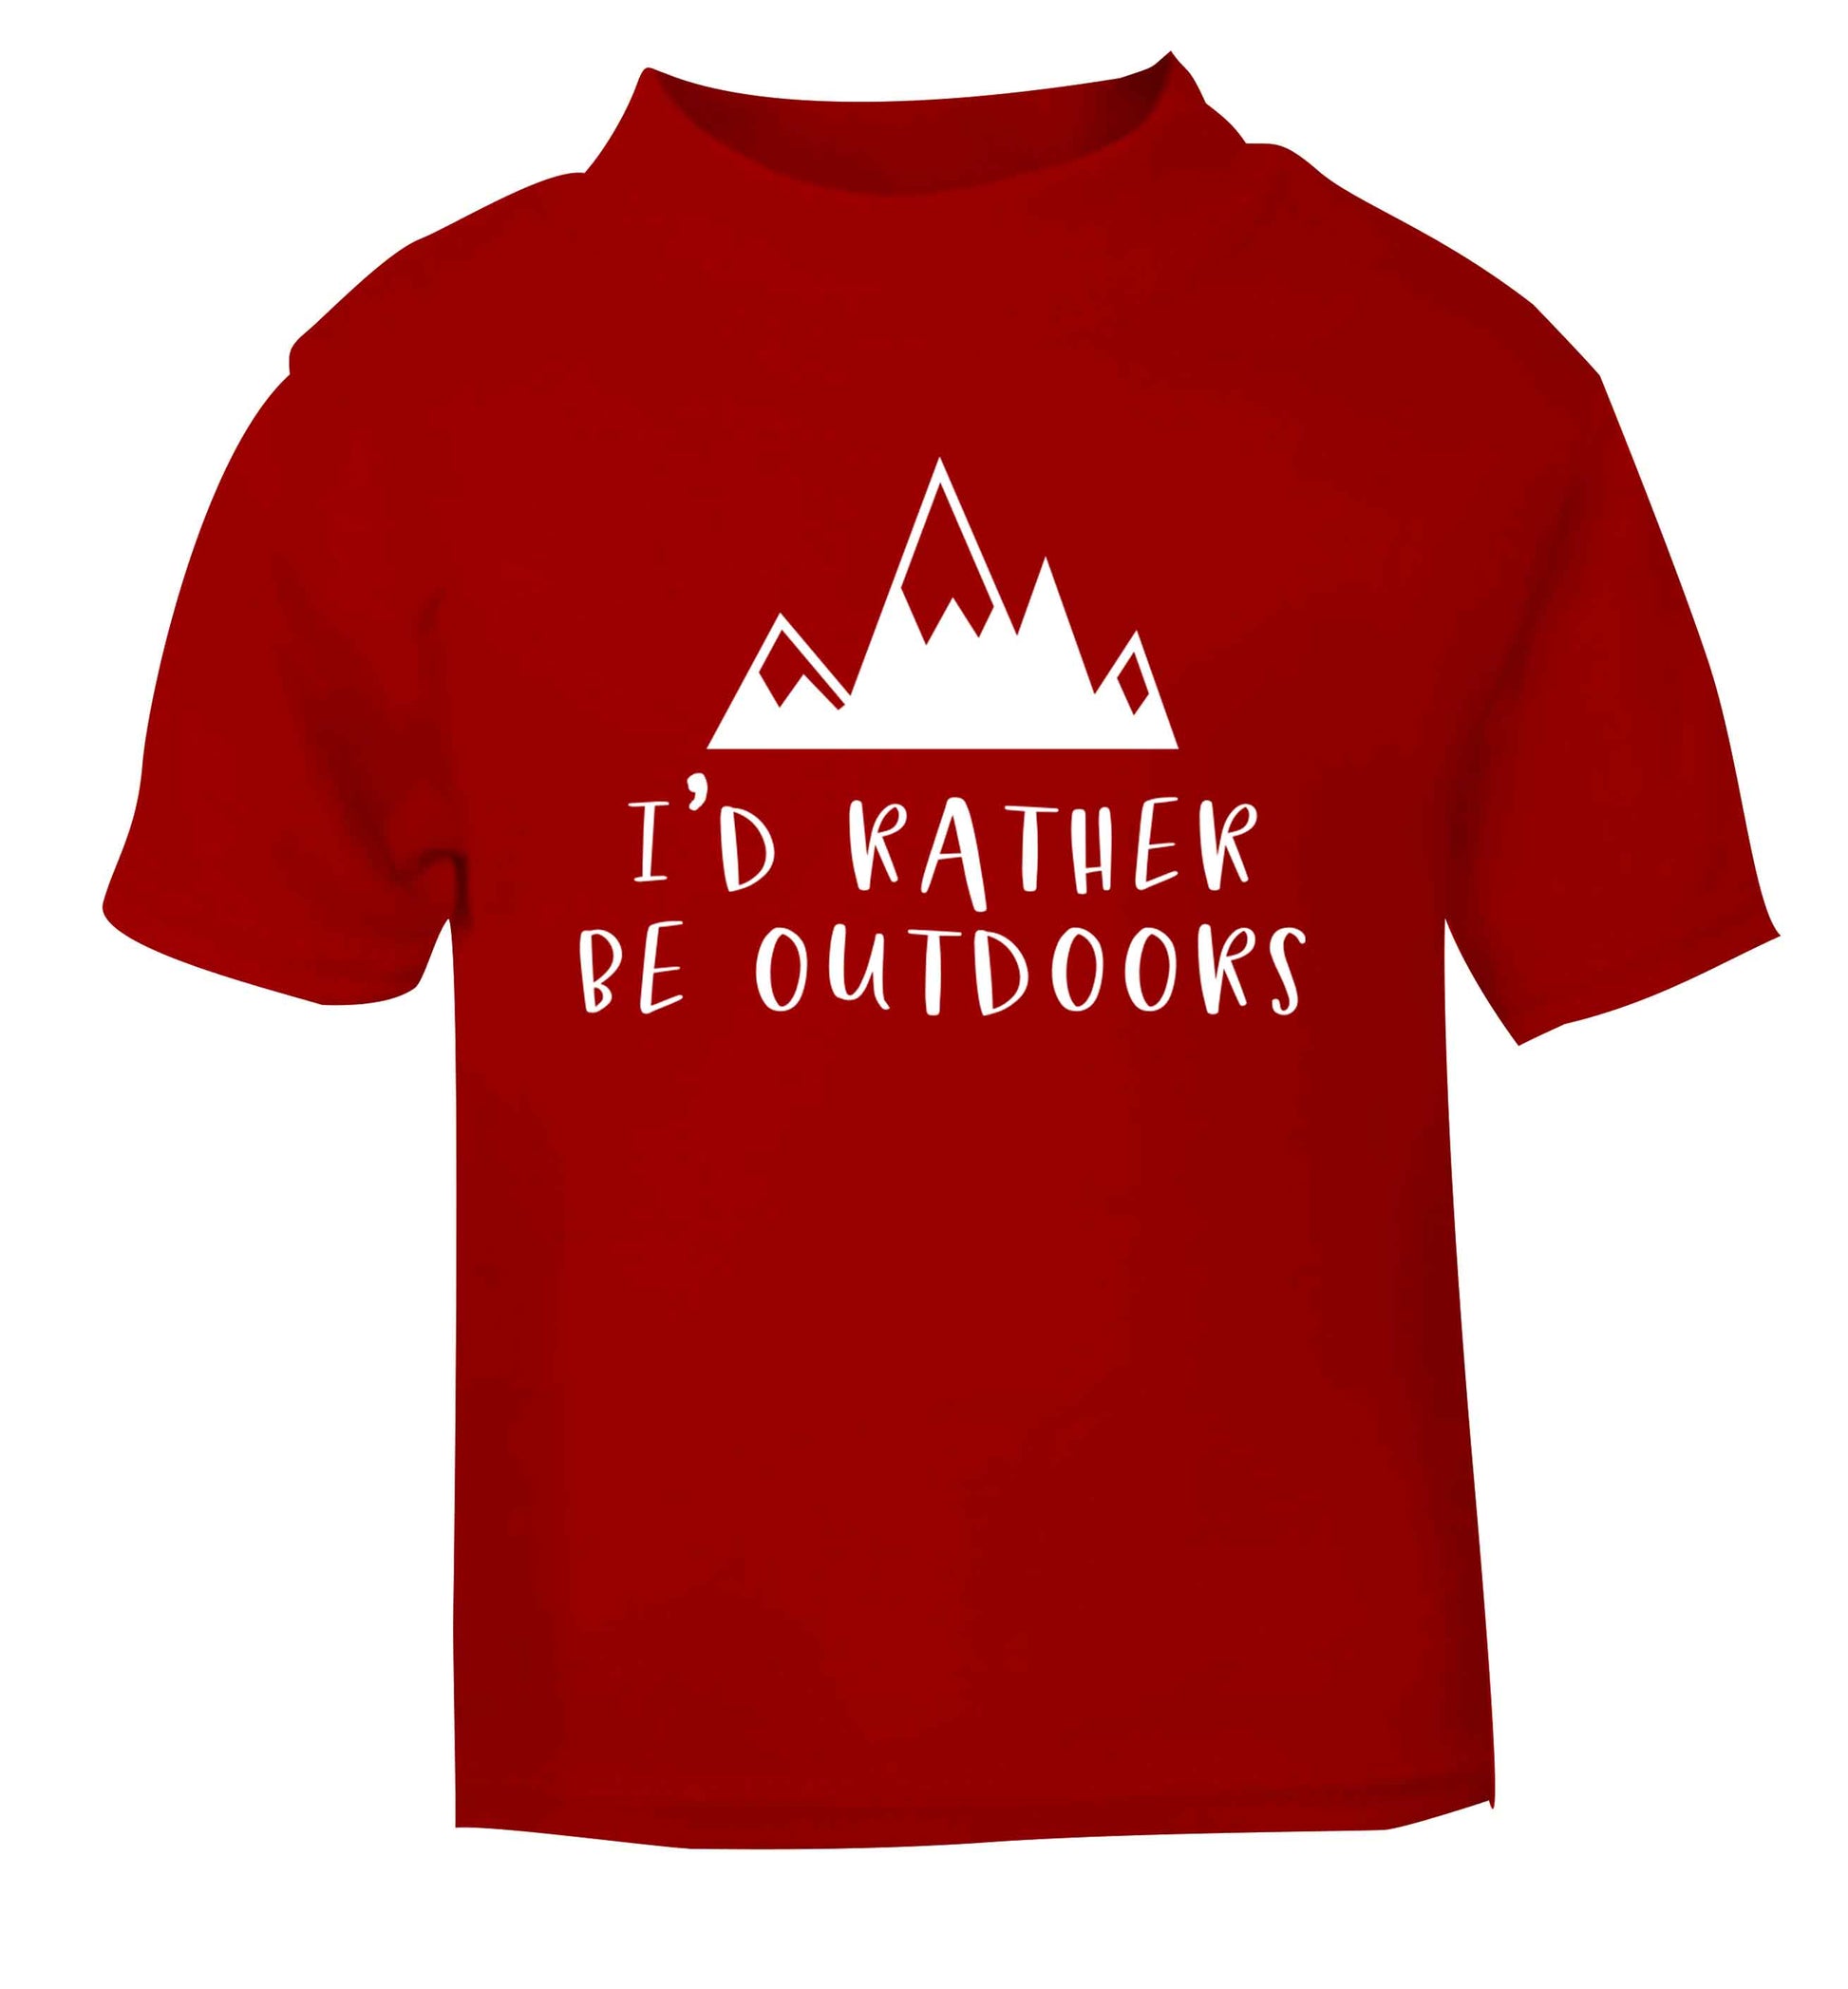 I'd rather be outdoors red Baby Toddler Tshirt 2 Years